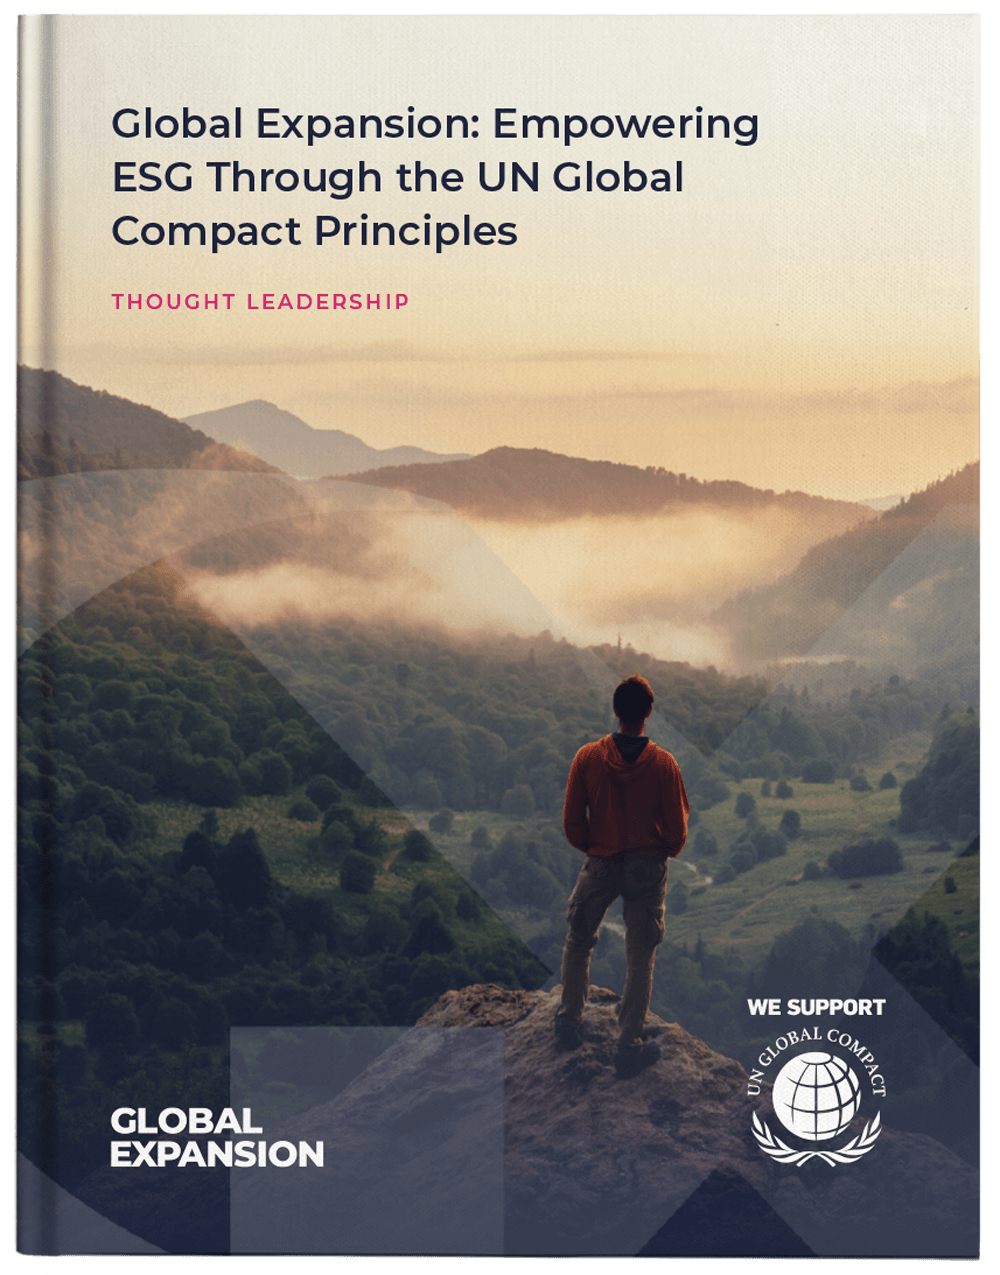 Global-Expansion-Empowering-ESG-Through-the-UN-Global-Compact-Principles-Cover